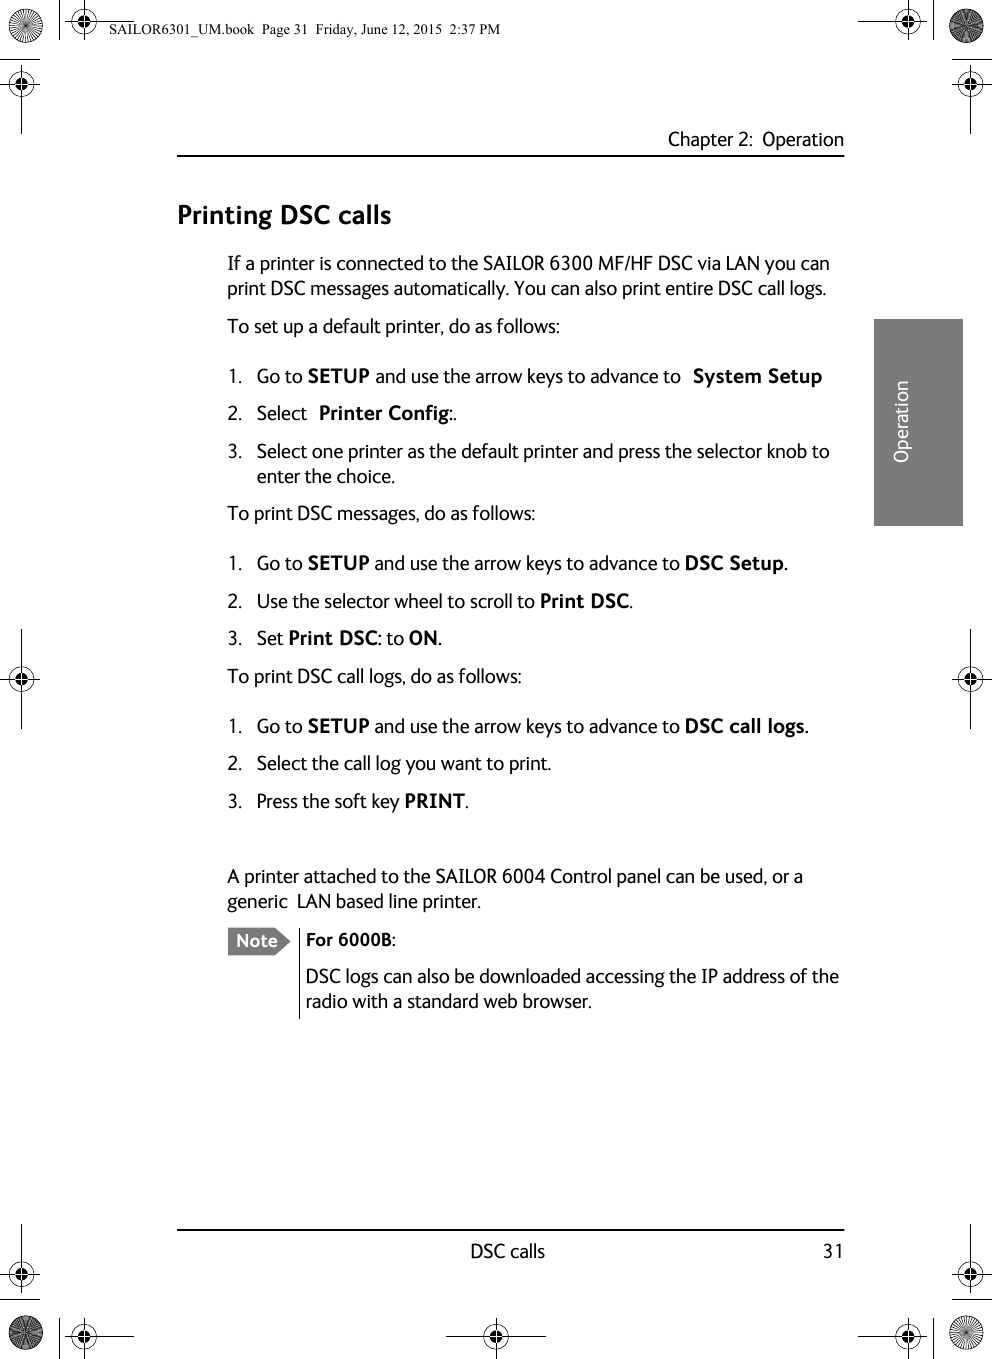 Chapter 2:  OperationDSC calls 3122222OperationPrinting DSC callsIf a printer is connected to the SAILOR 6300 MF/HF DSC via LAN you can print DSC messages automatically. You can also print entire DSC call logs. To set up a default printer, do as follows:1. Go to SETUP and use the arrow keys to advance to  System Setup2. Select  Printer Config:. 3. Select one printer as the default printer and press the selector knob to enter the choice.To print DSC messages, do as follows:1. Go to SETUP and use the arrow keys to advance to DSC Setup.2. Use the selector wheel to scroll to Print DSC.3. Set Print DSC: to ON.To print DSC call logs, do as follows:1. Go to SETUP and use the arrow keys to advance to DSC call logs.2. Select the call log you want to print.3. Press the soft key PRINT.A printer attached to the SAILOR 6004 Control panel can be used, or a generic  LAN based line printer.Note For 6000B:DSC logs can also be downloaded accessing the IP address of the radio with a standard web browser.SAILOR6301_UM.book  Page 31  Friday, June 12, 2015  2:37 PM